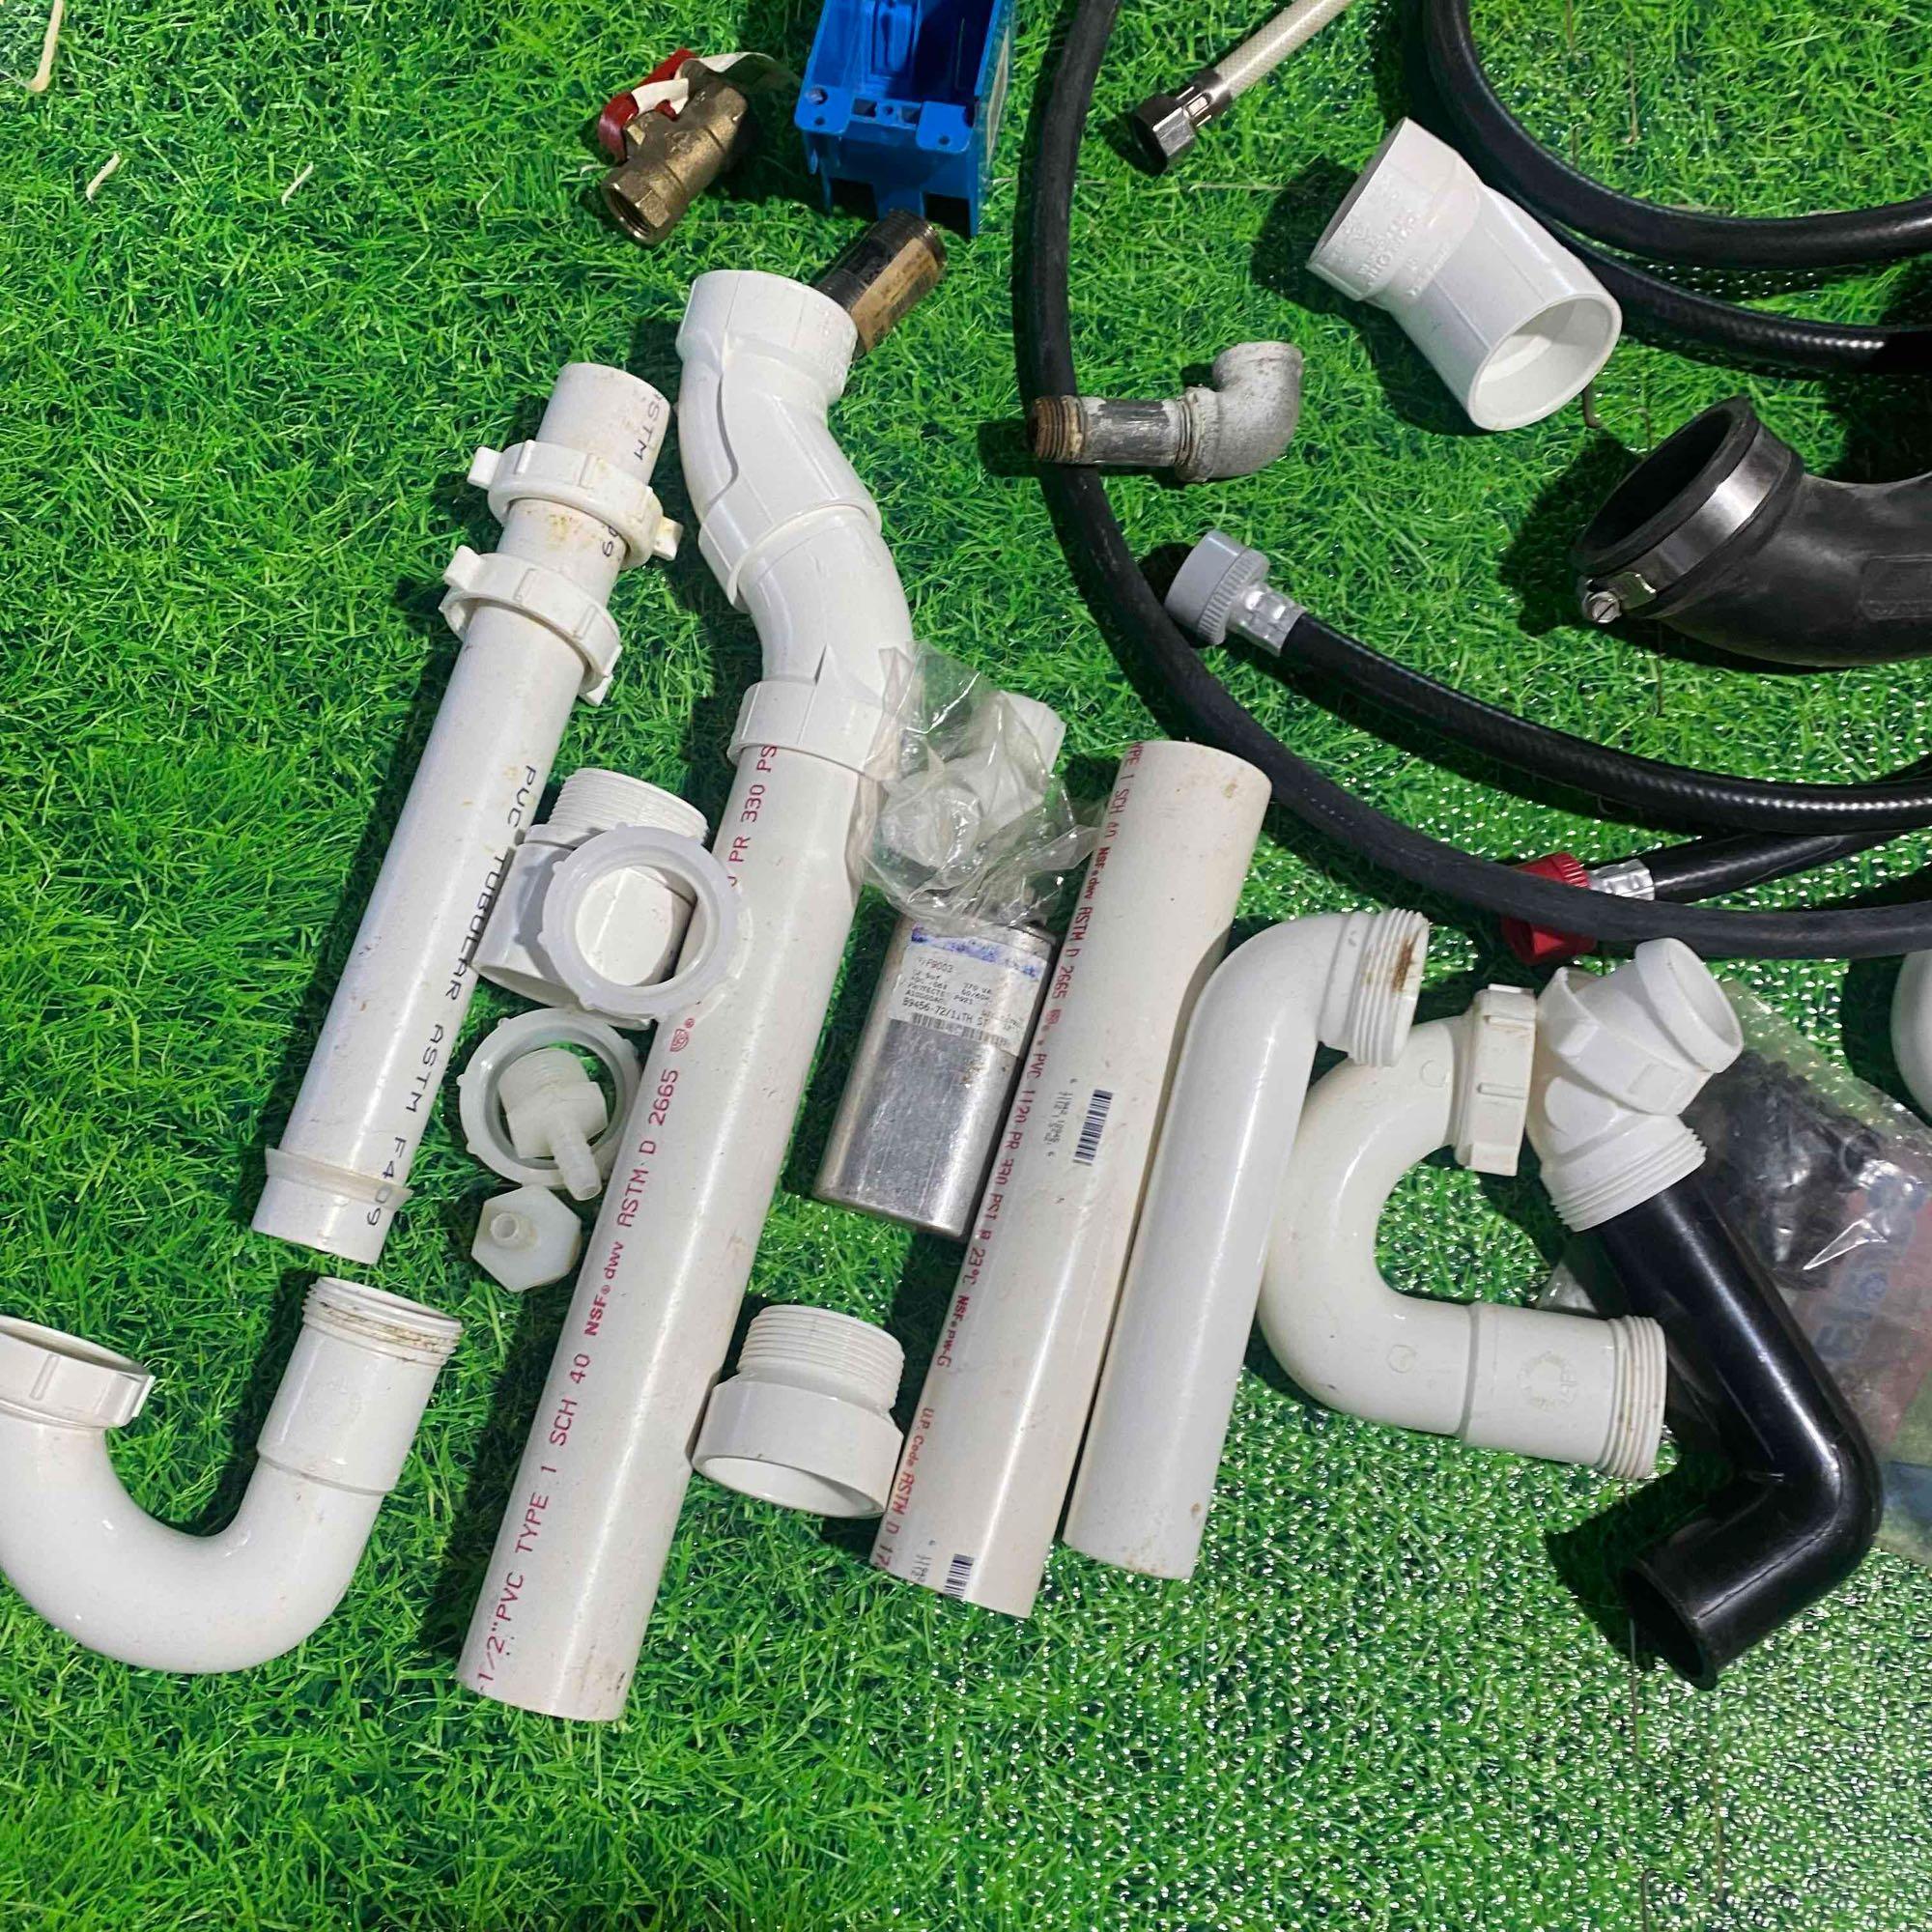 pvc pipes, faucets and hoses